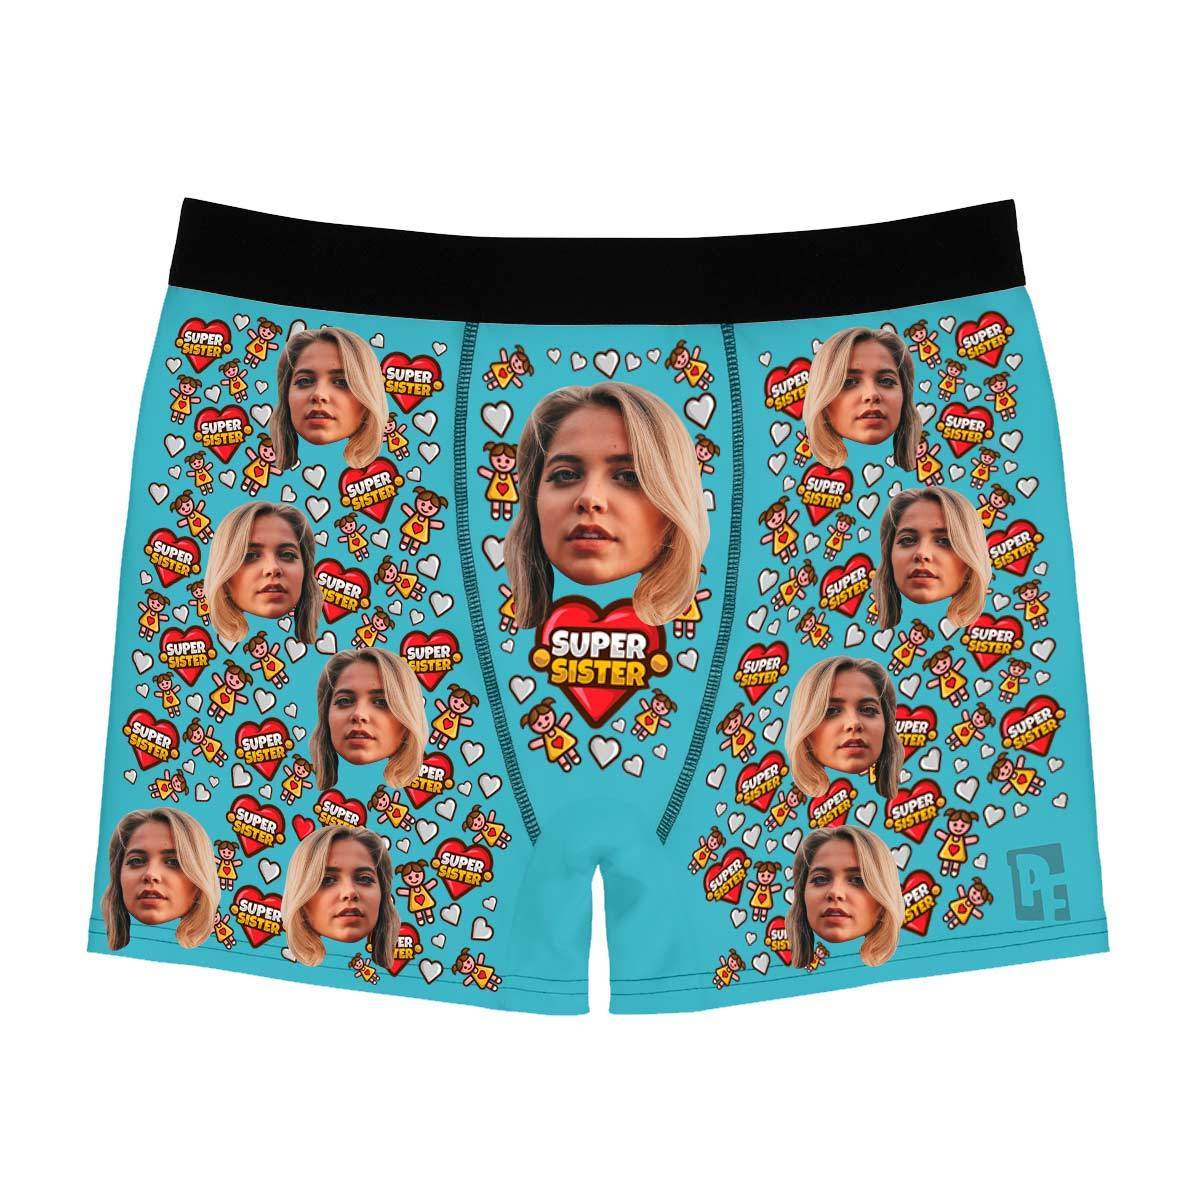 Mint Super Sister men's boxer briefs personalized with photo printed on them